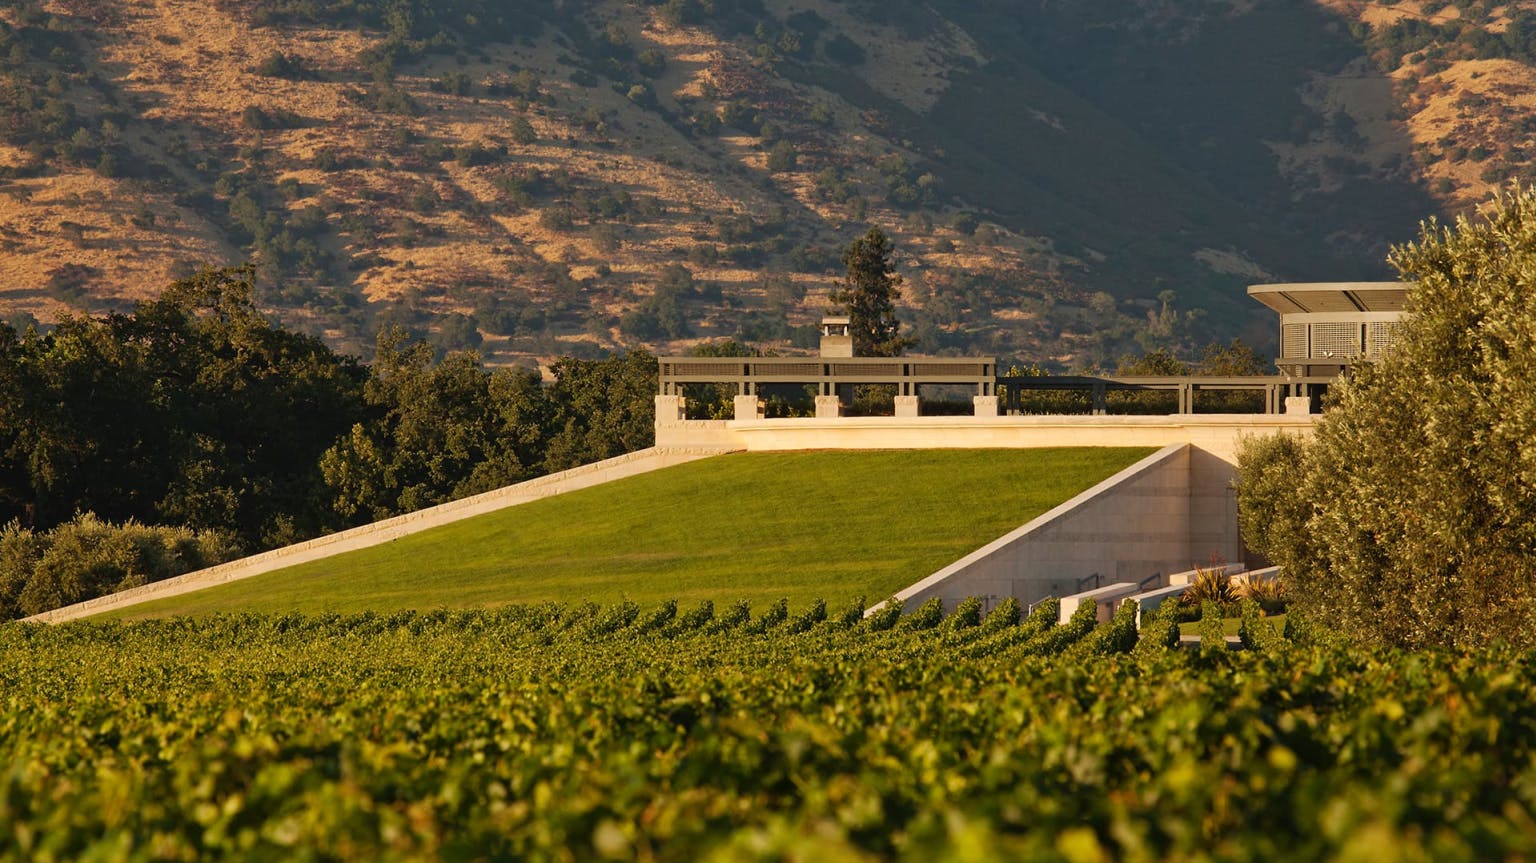 Napa 2021: rich, fresh and a relief